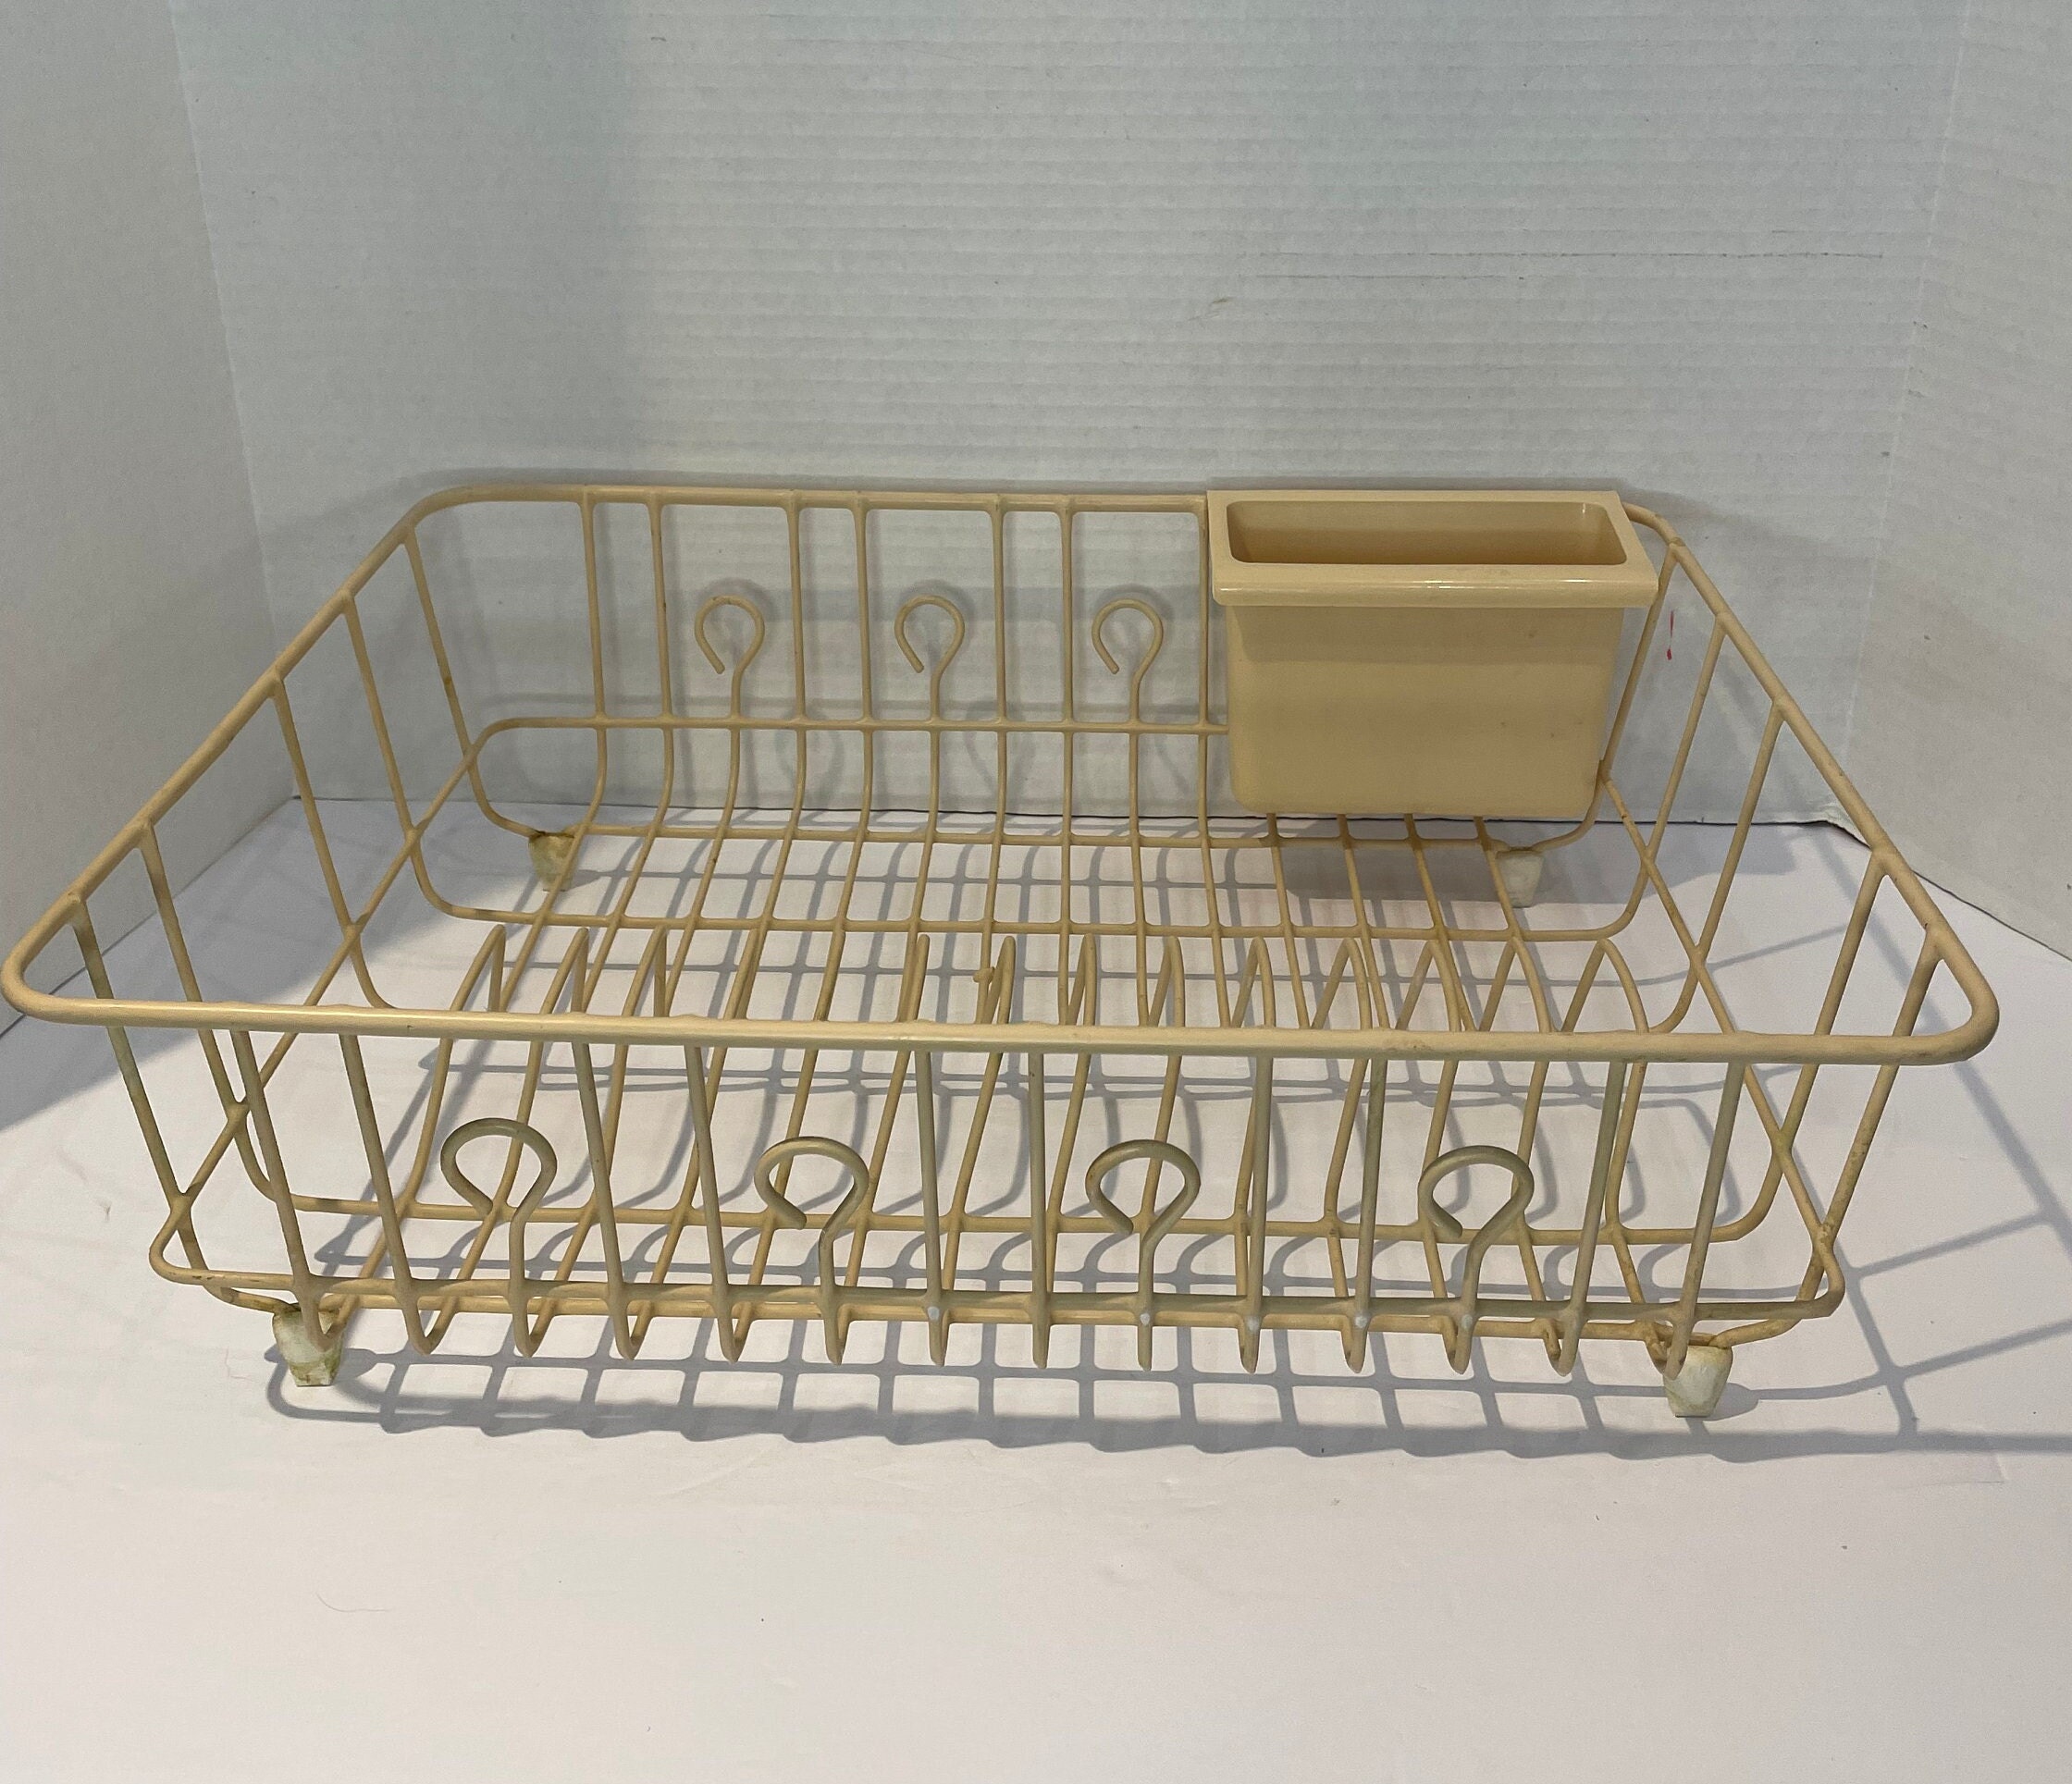 VTG Rubbermaid Country Blue Coated Wire Dish Rack Drainer 